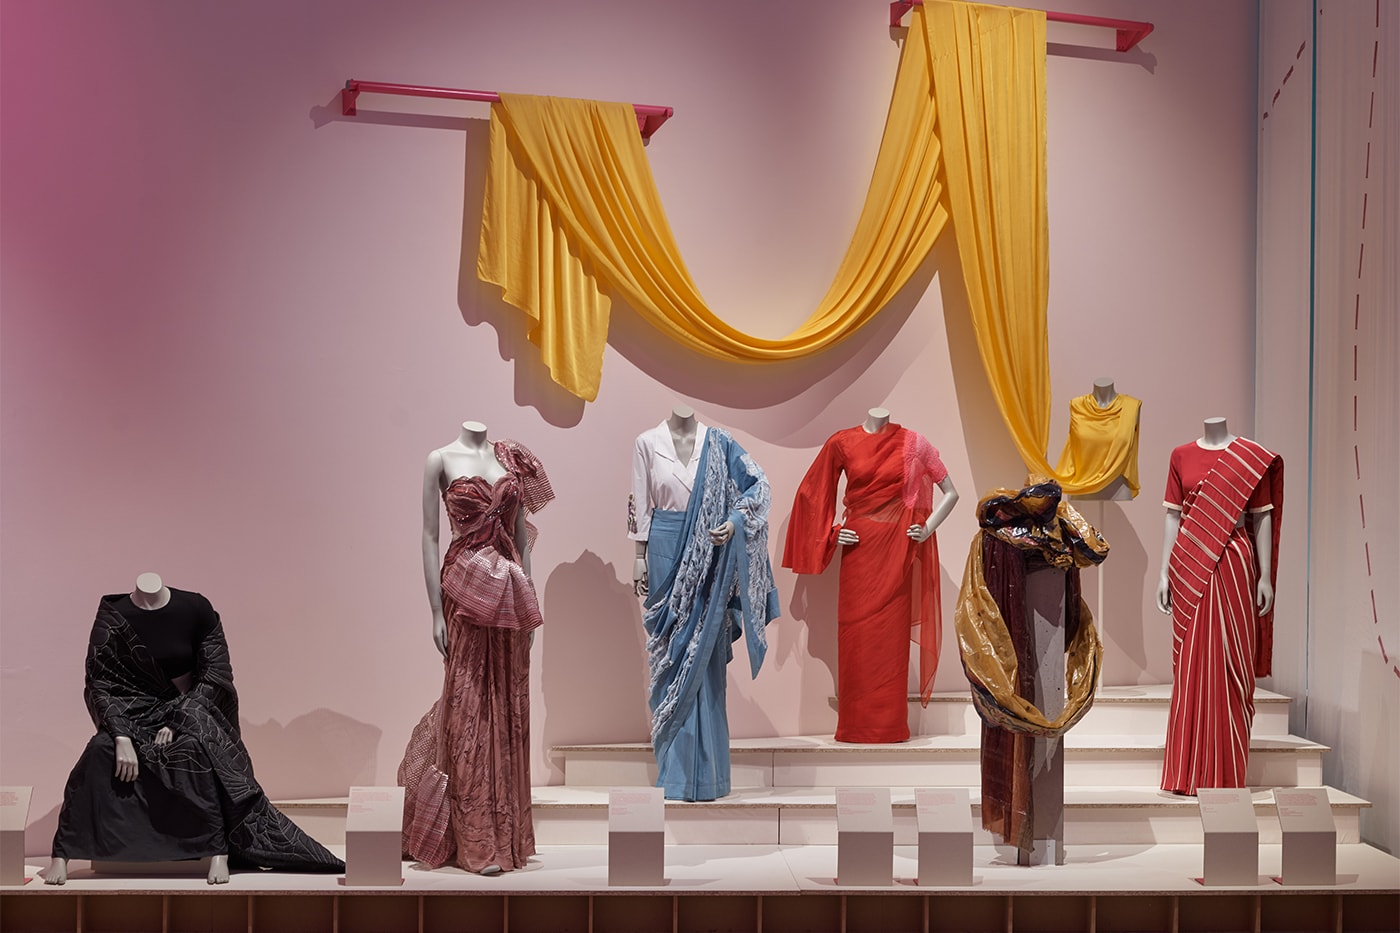 The Sari's Historical and Contemporary Significance Explored at London's Design Museum